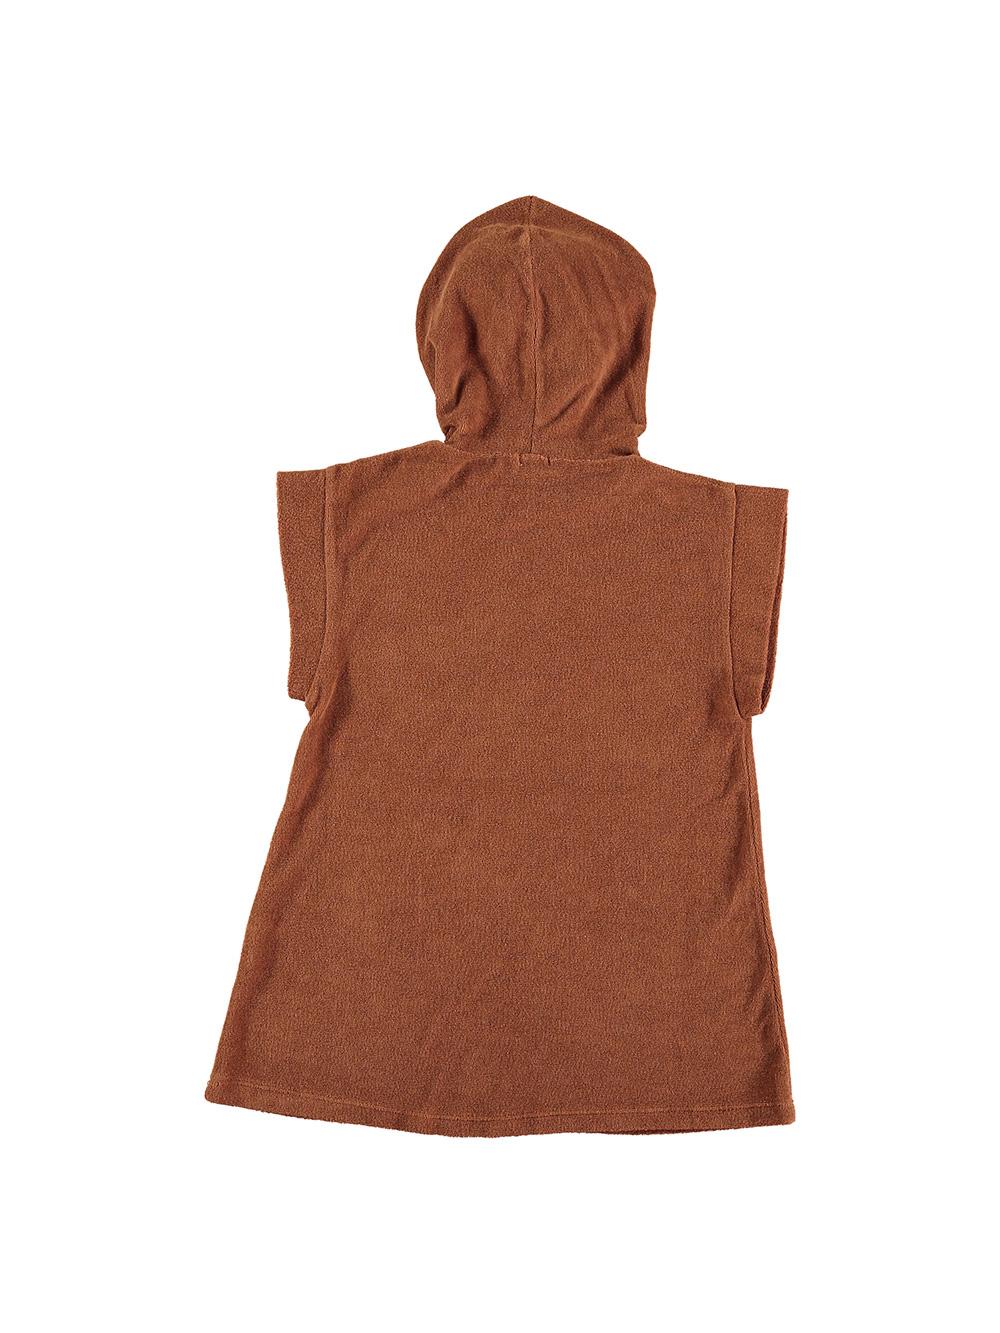 HOODED DRESS IN BROWN NOTE EMBROIDERED TERRY